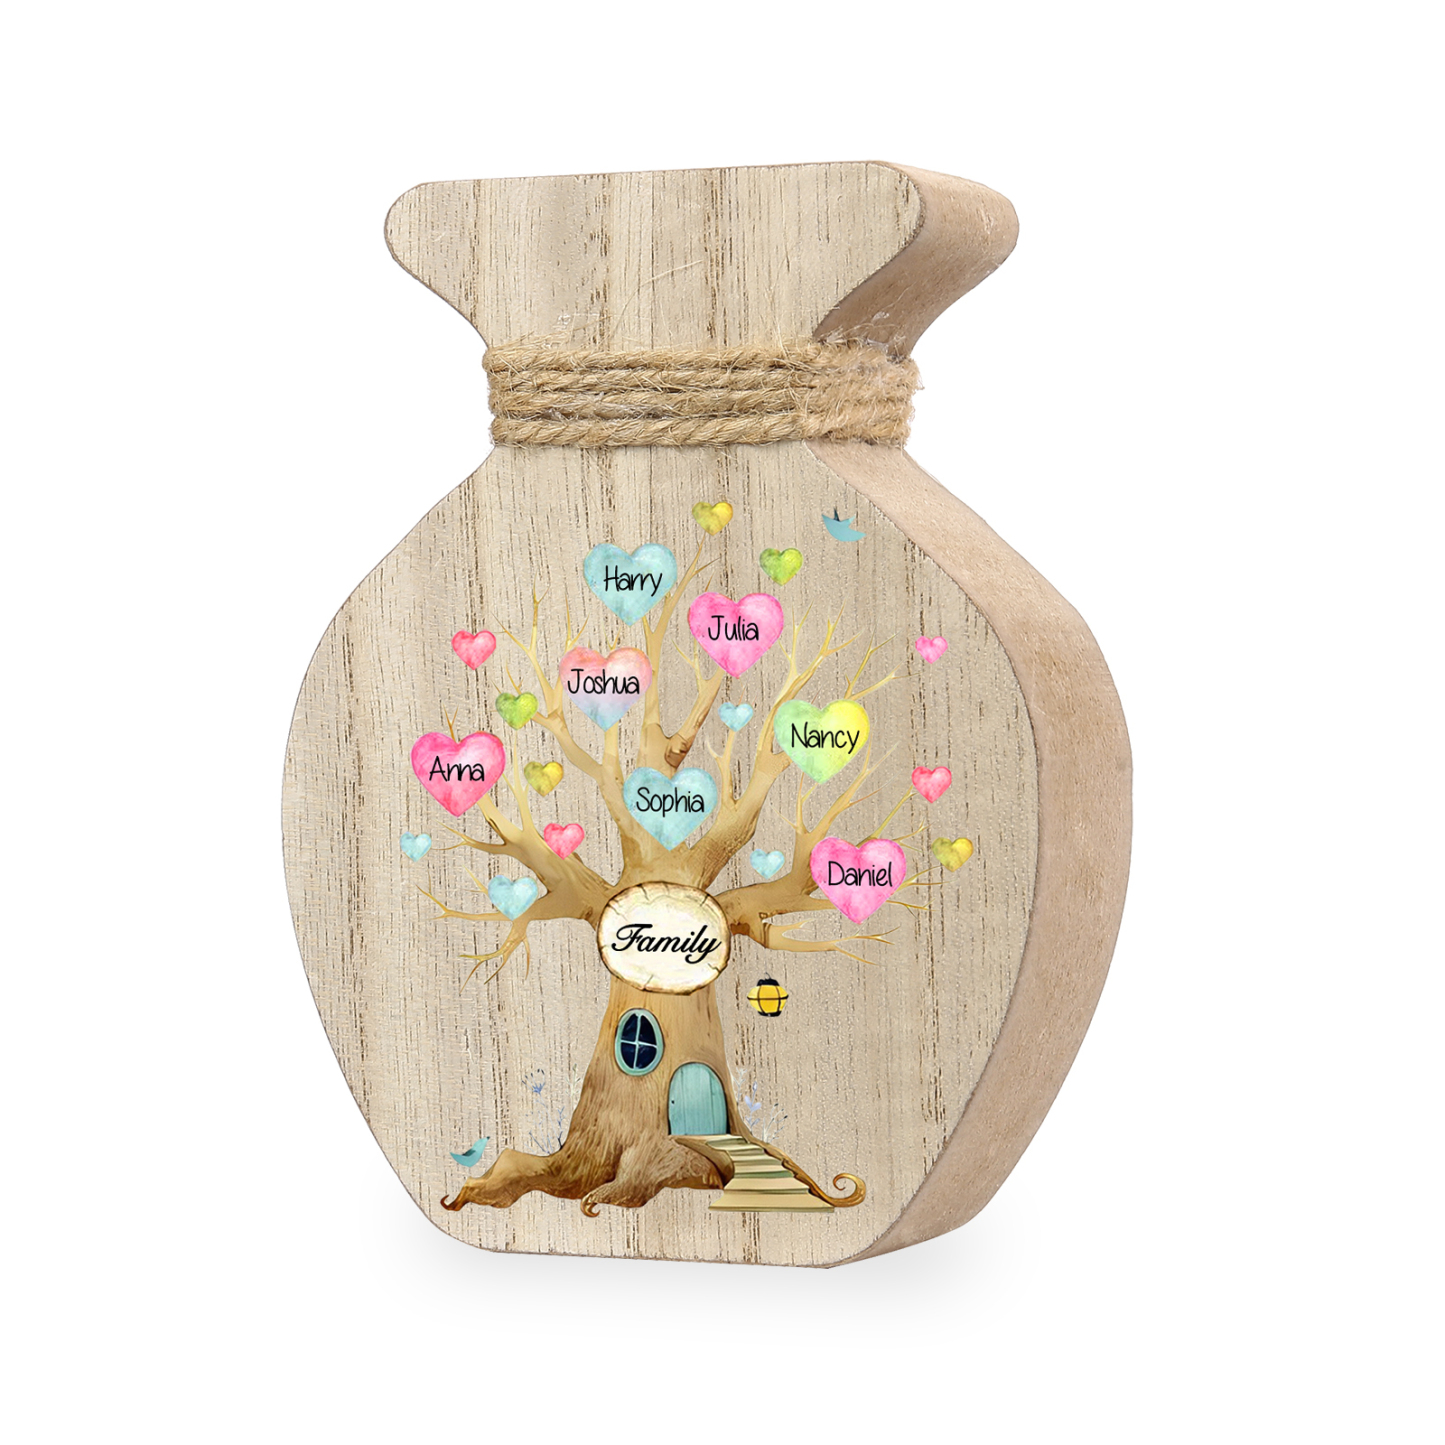 7 Names - Personalized Custom Text and Name Wooden Ornament Vase as A Gift for Family